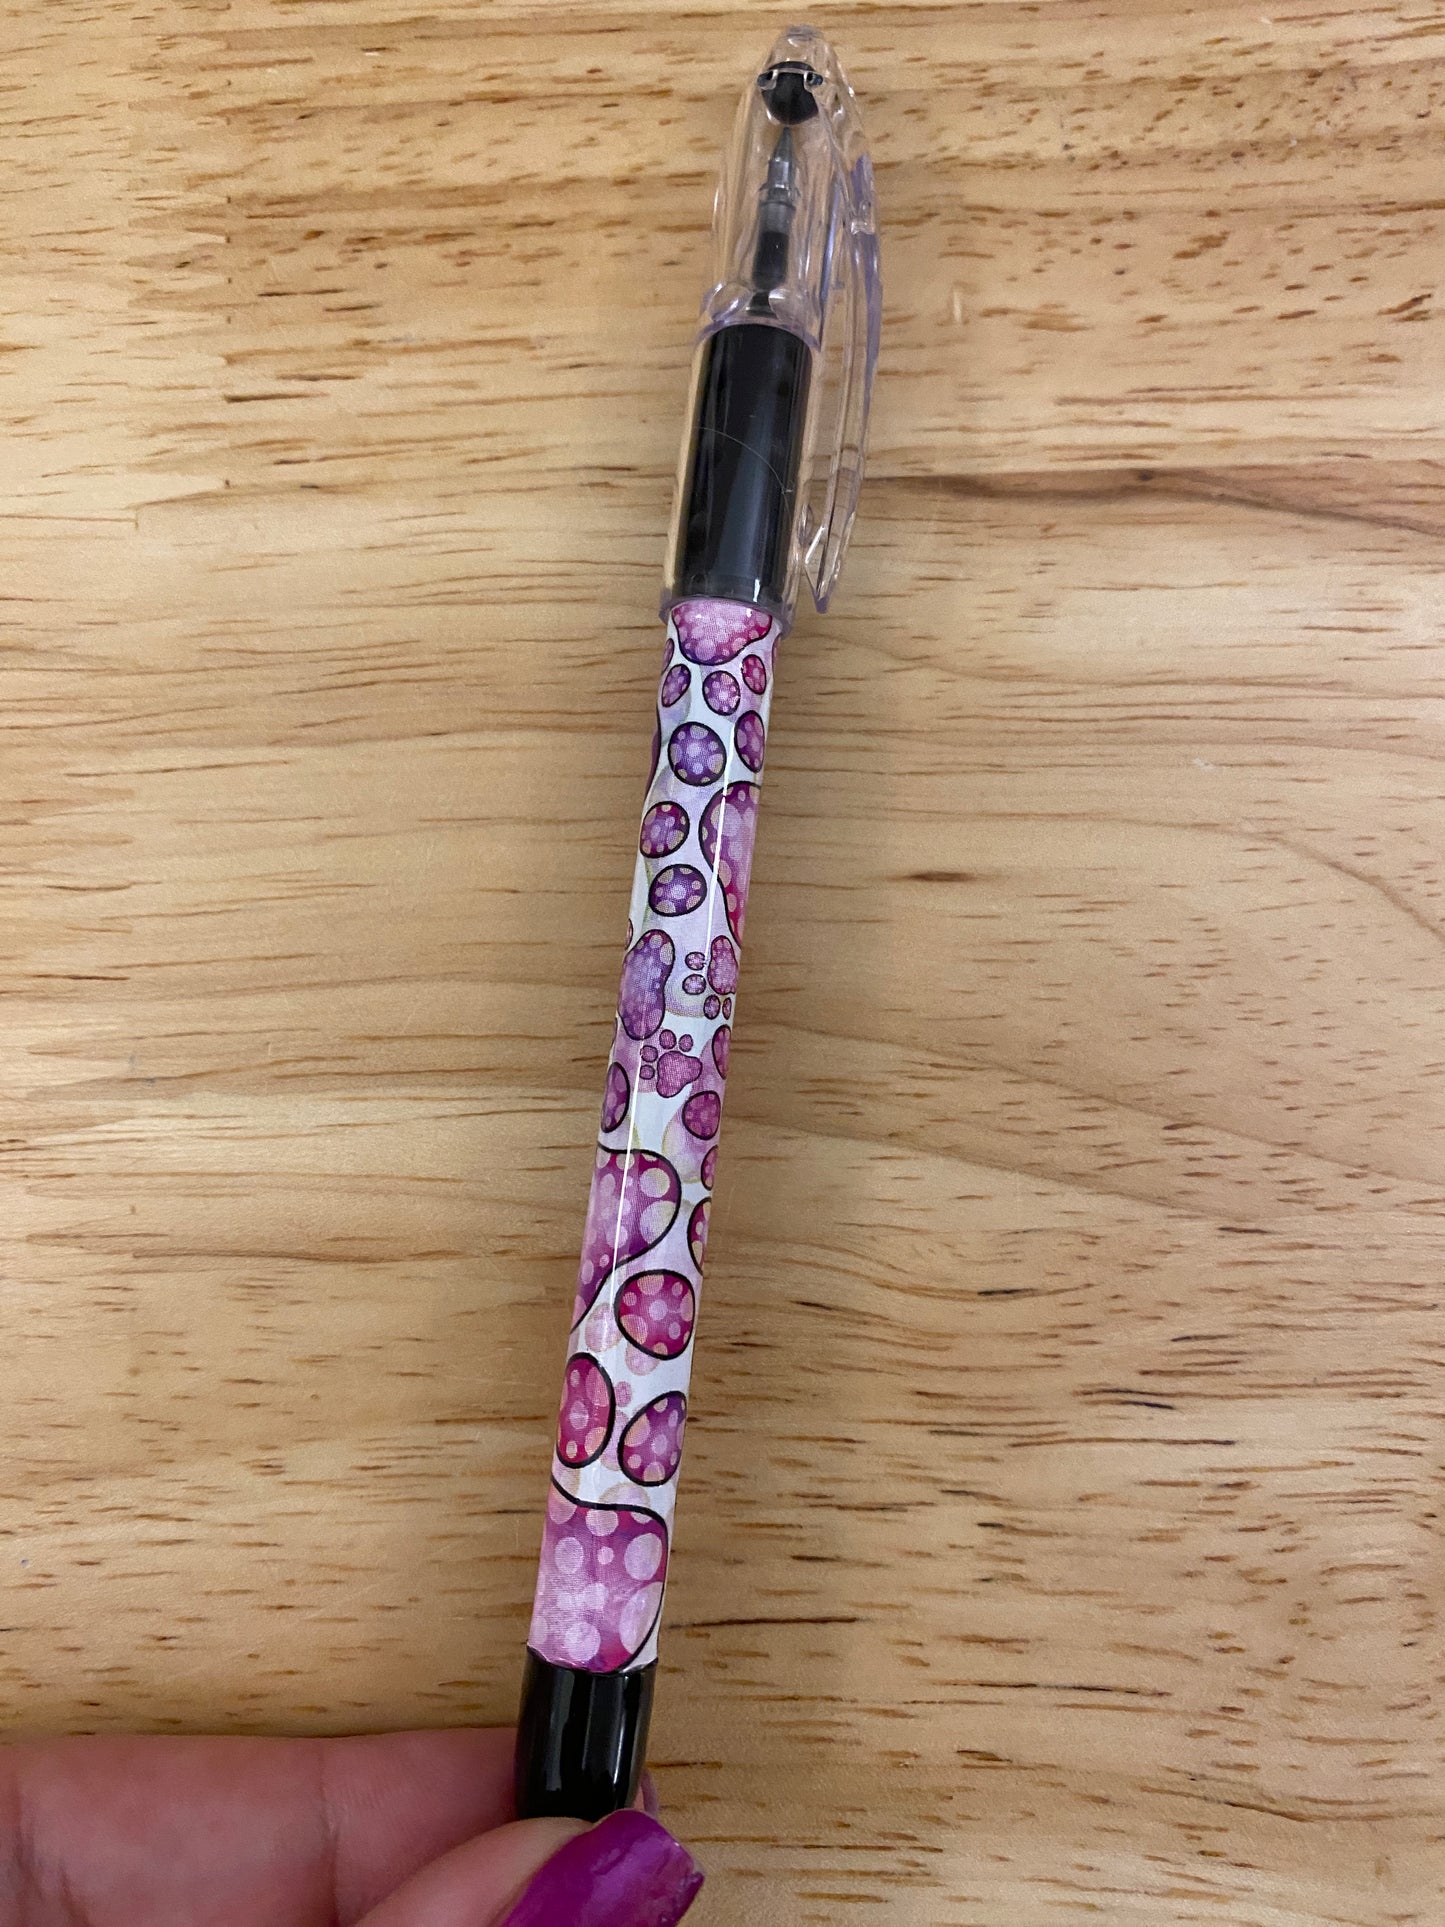 Paw print pen, Cute Paws on pen, Pink and Purple Paw Print Pen, RSVP pental Pen with Paws